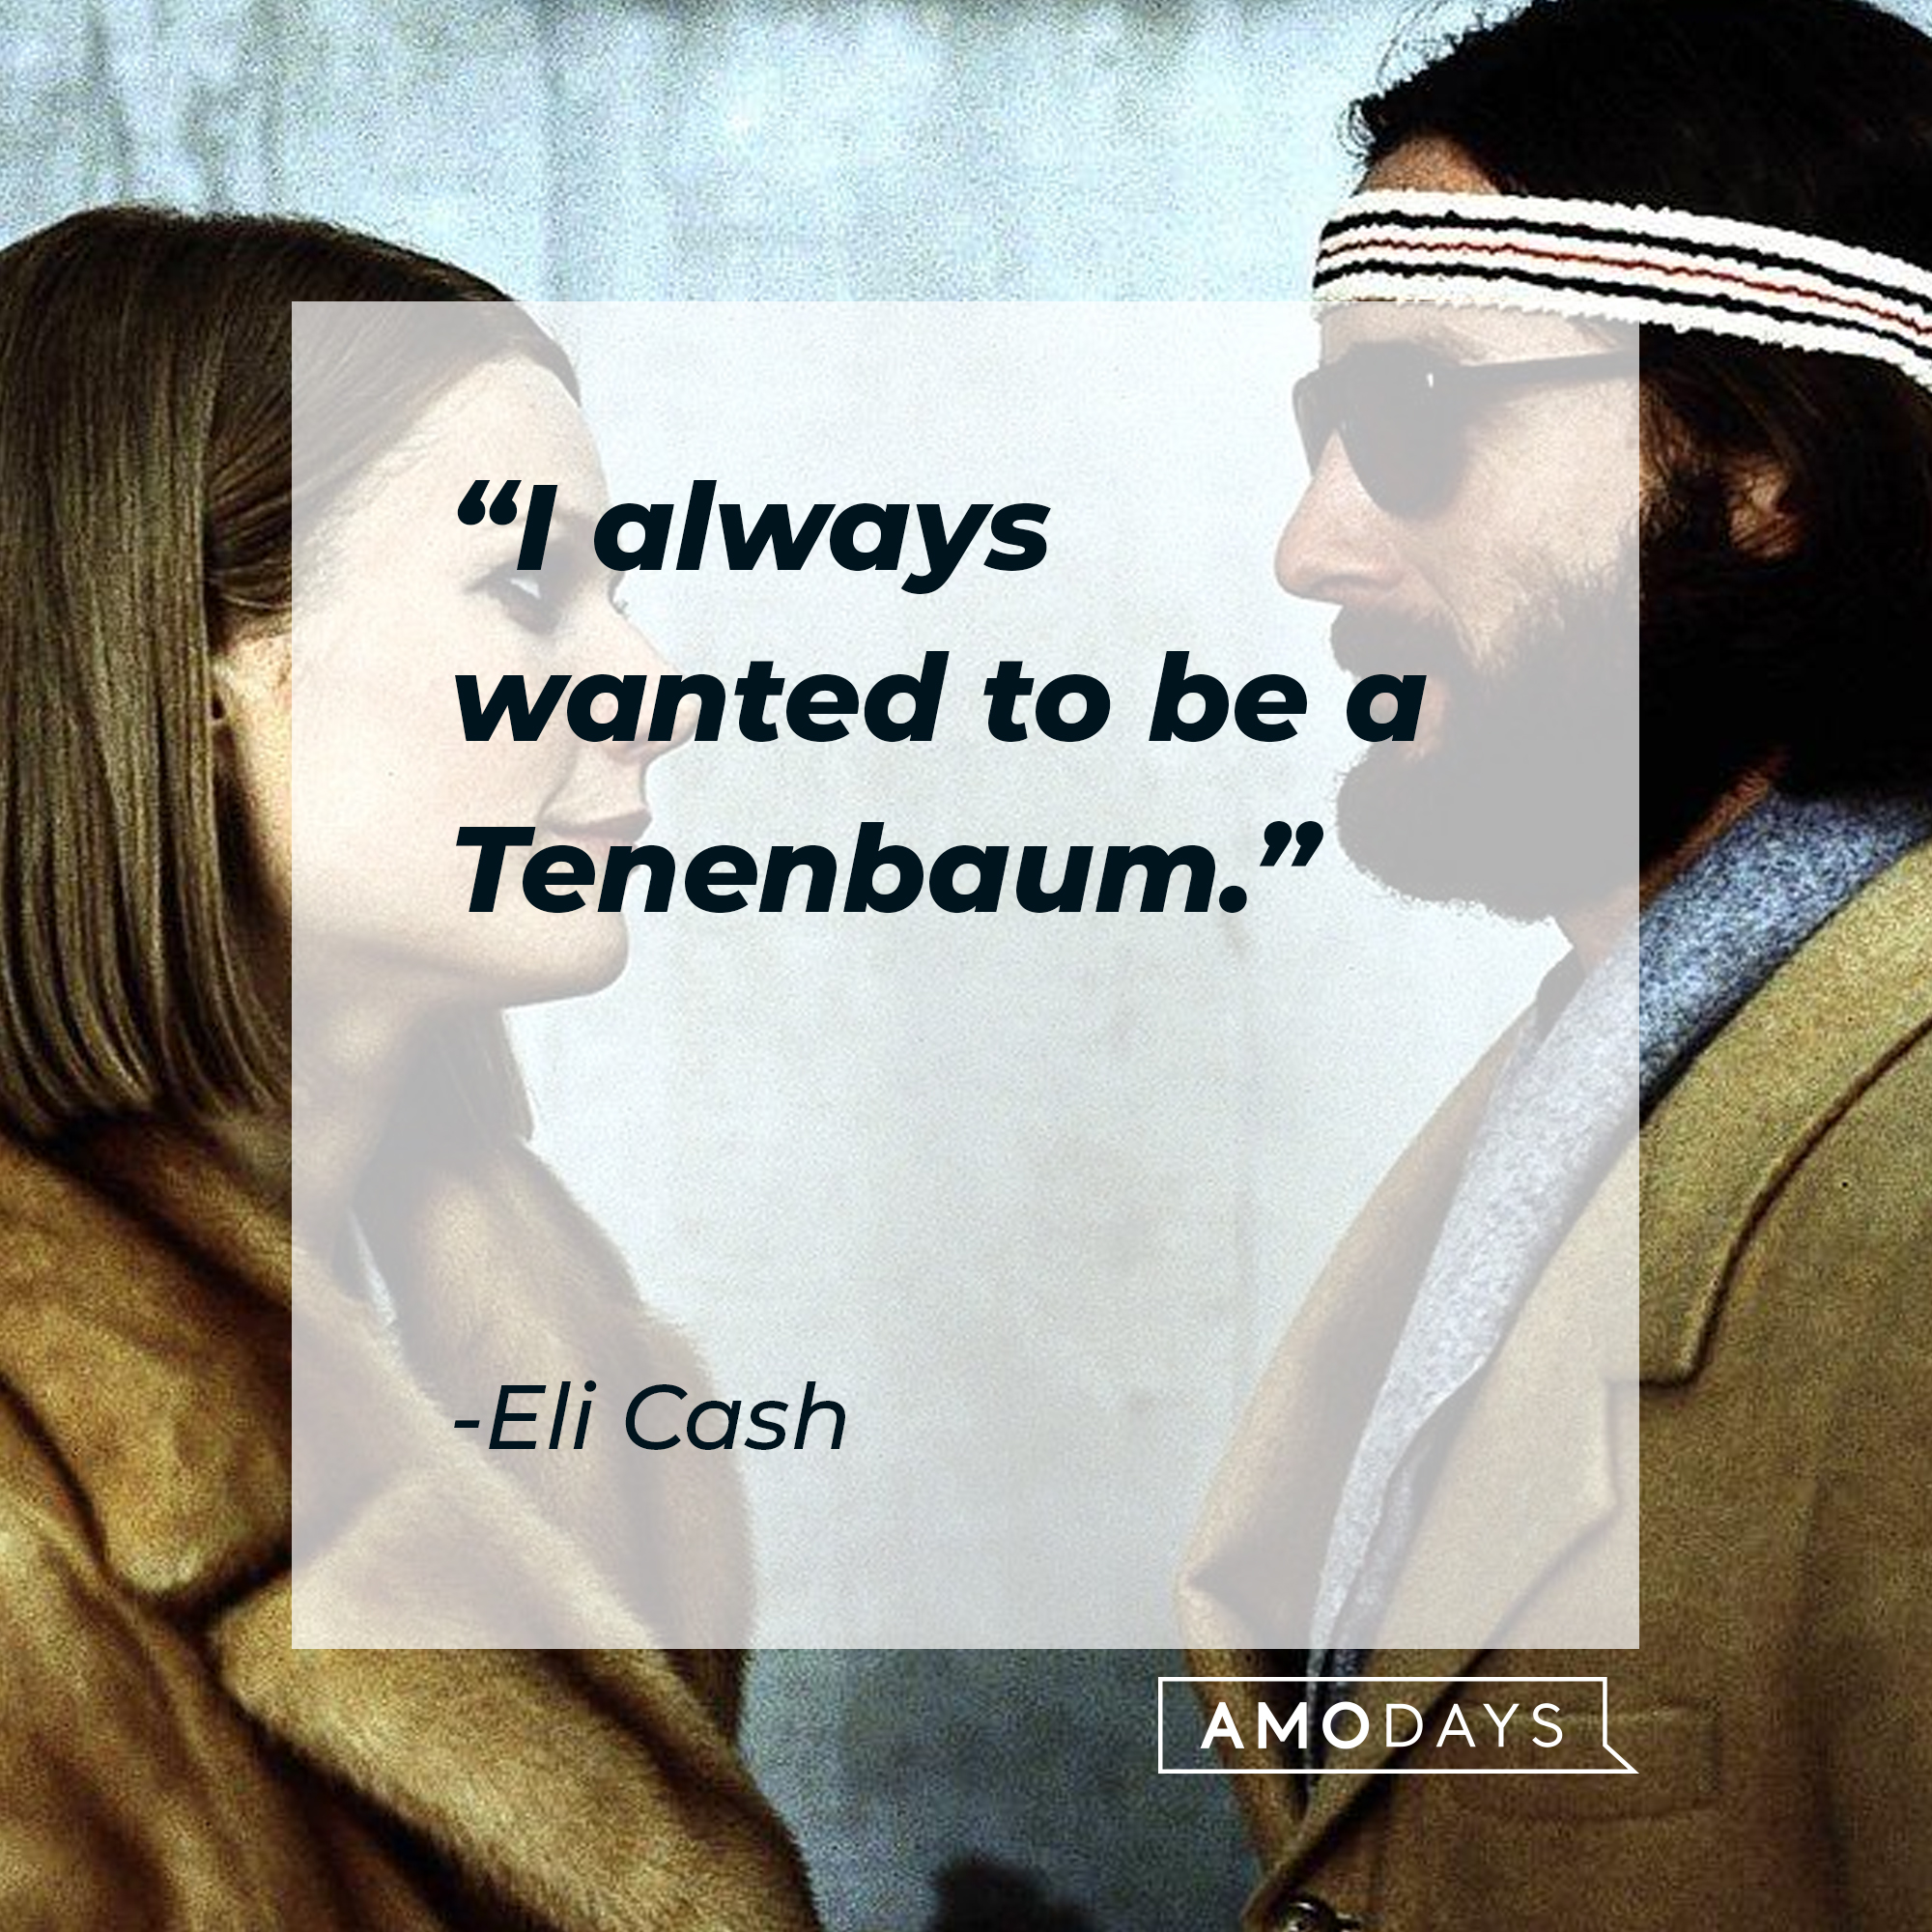 Eli Cash's quote: "I always wanted to be a Tenenbaum." | Image: AmoDays